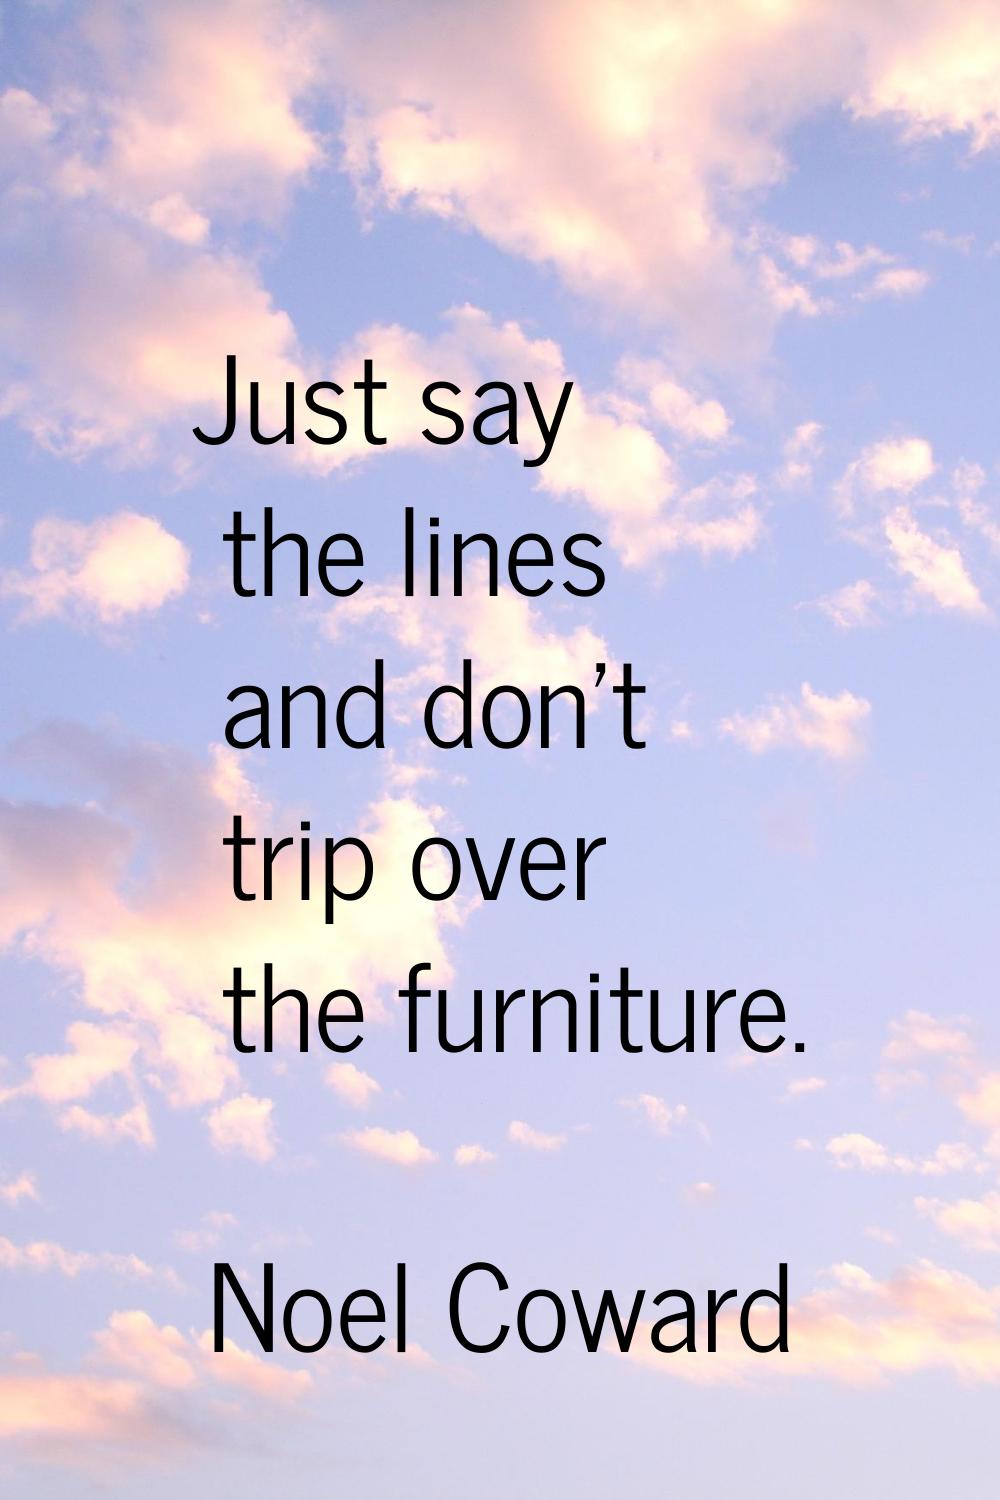 Just say the lines and don't trip over the furniture.